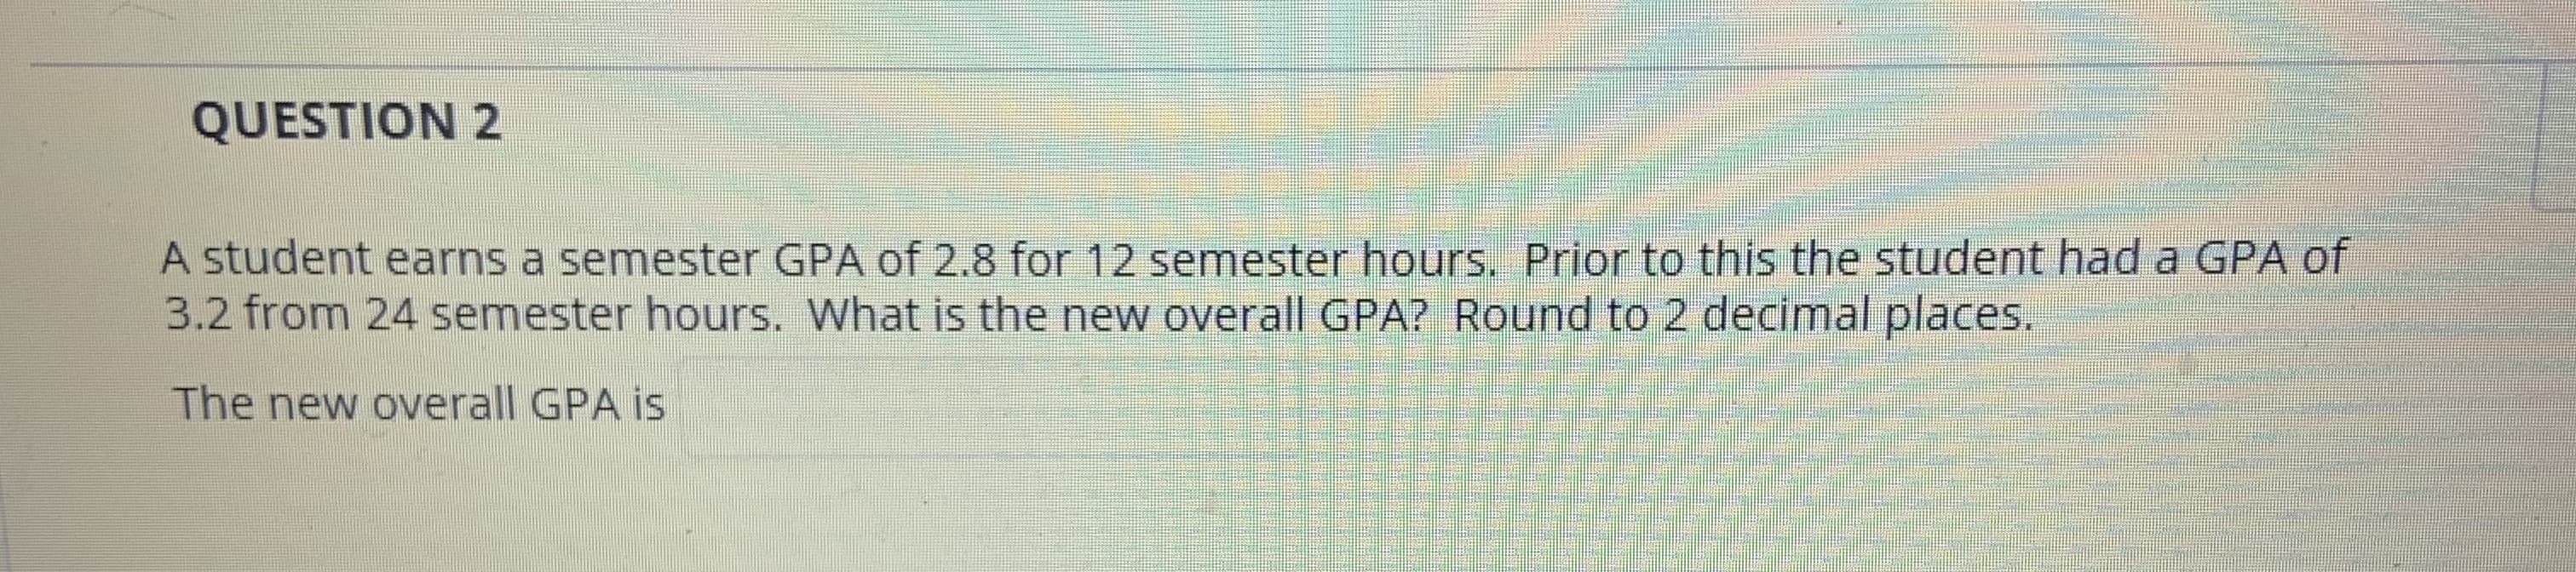 A student earns a semester GPA of 2.8 for 12 semester hours. Prior to this the student had a GPA of
3.2 from 24 semester hours. What is the new overall GPA? Round to 2 decimal places.
